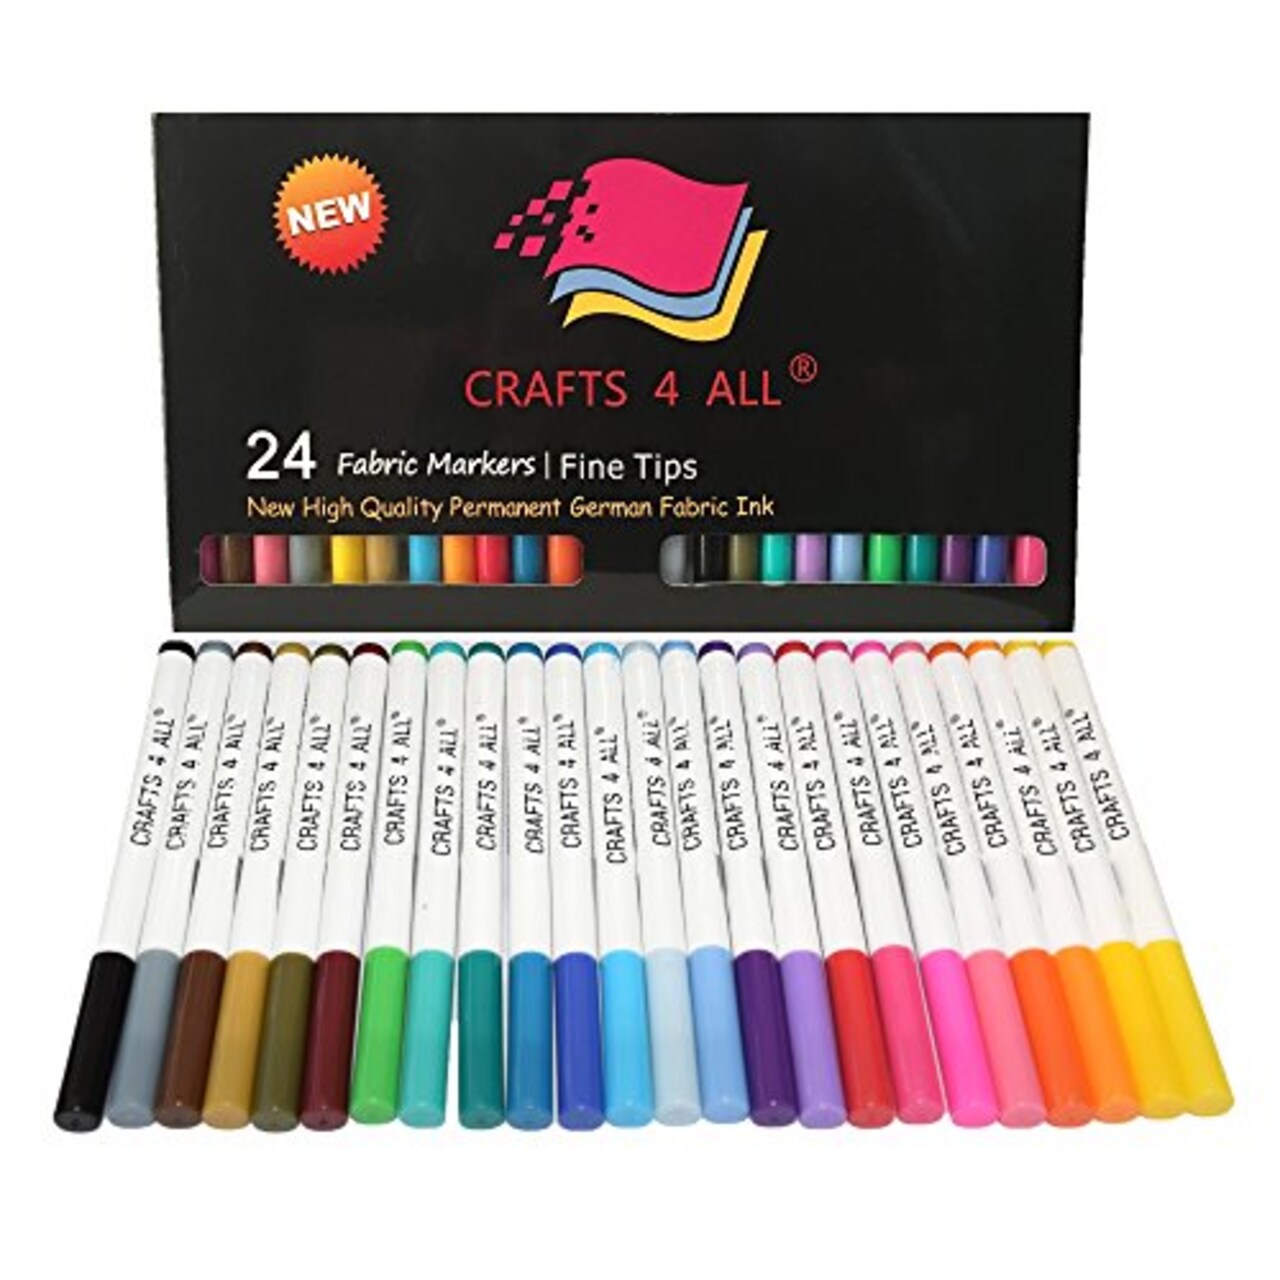 Crafts 4 All Fabric Pens for Clothes - Pack of 24 No Fade, Fabric